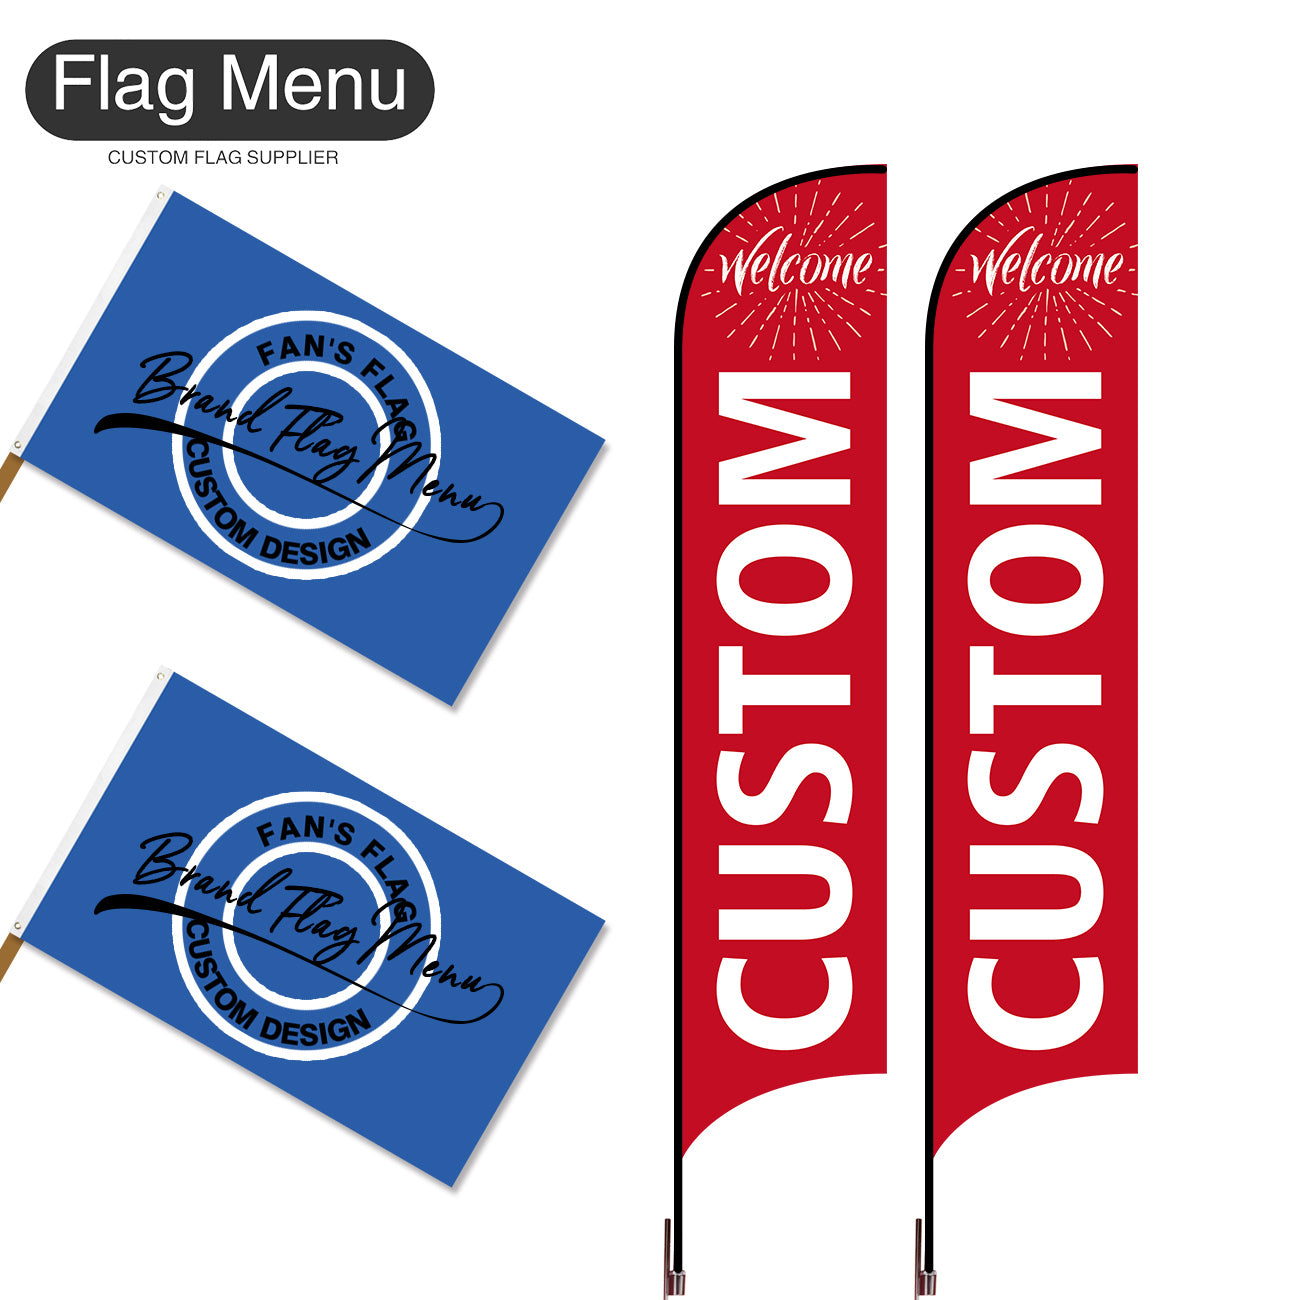 Outdoor Advertising Set - C-Red-S - Feather Flag -Double Sided & 3'x5' Regular Flag -Single Sided-Cross & Water Bag-Flag Menu